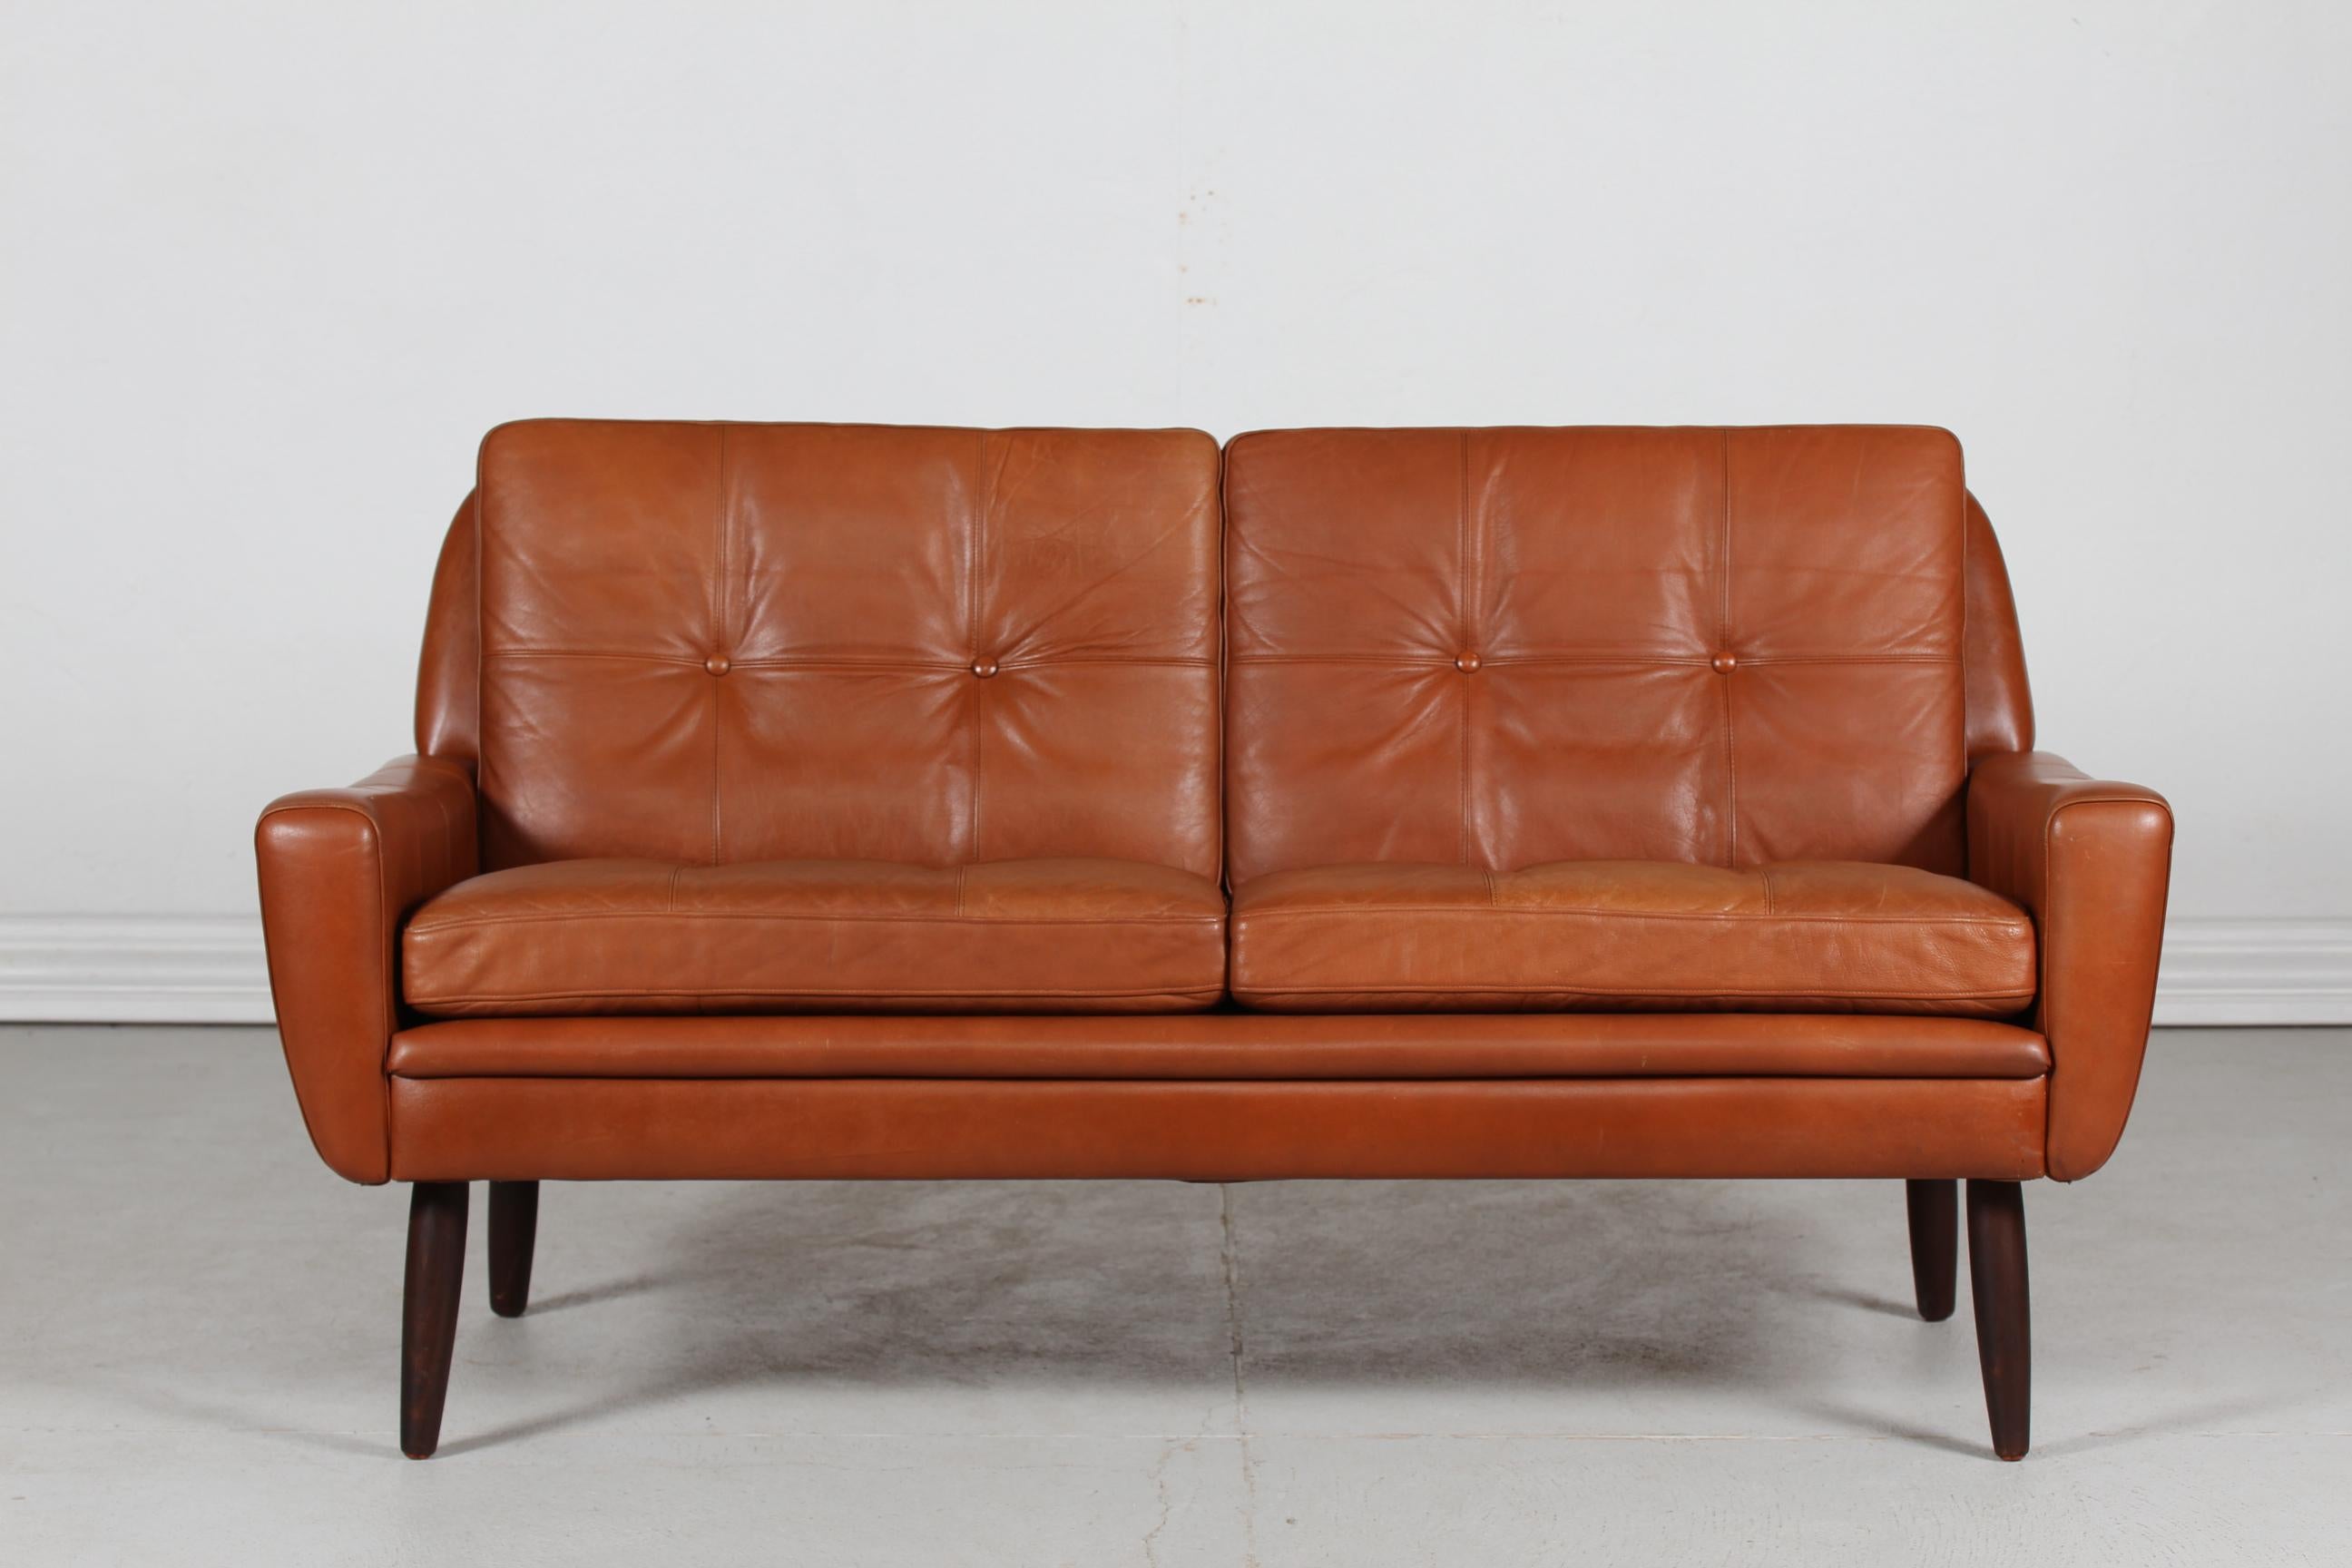 Danish vintage 2 seater sofa manufactured in Denmark in the 1960s.
It's upholstered with the original cognac-colored leather with light patina, leather buttons and removable cushions
The slightly conical legs are made of dark stained wood.

This